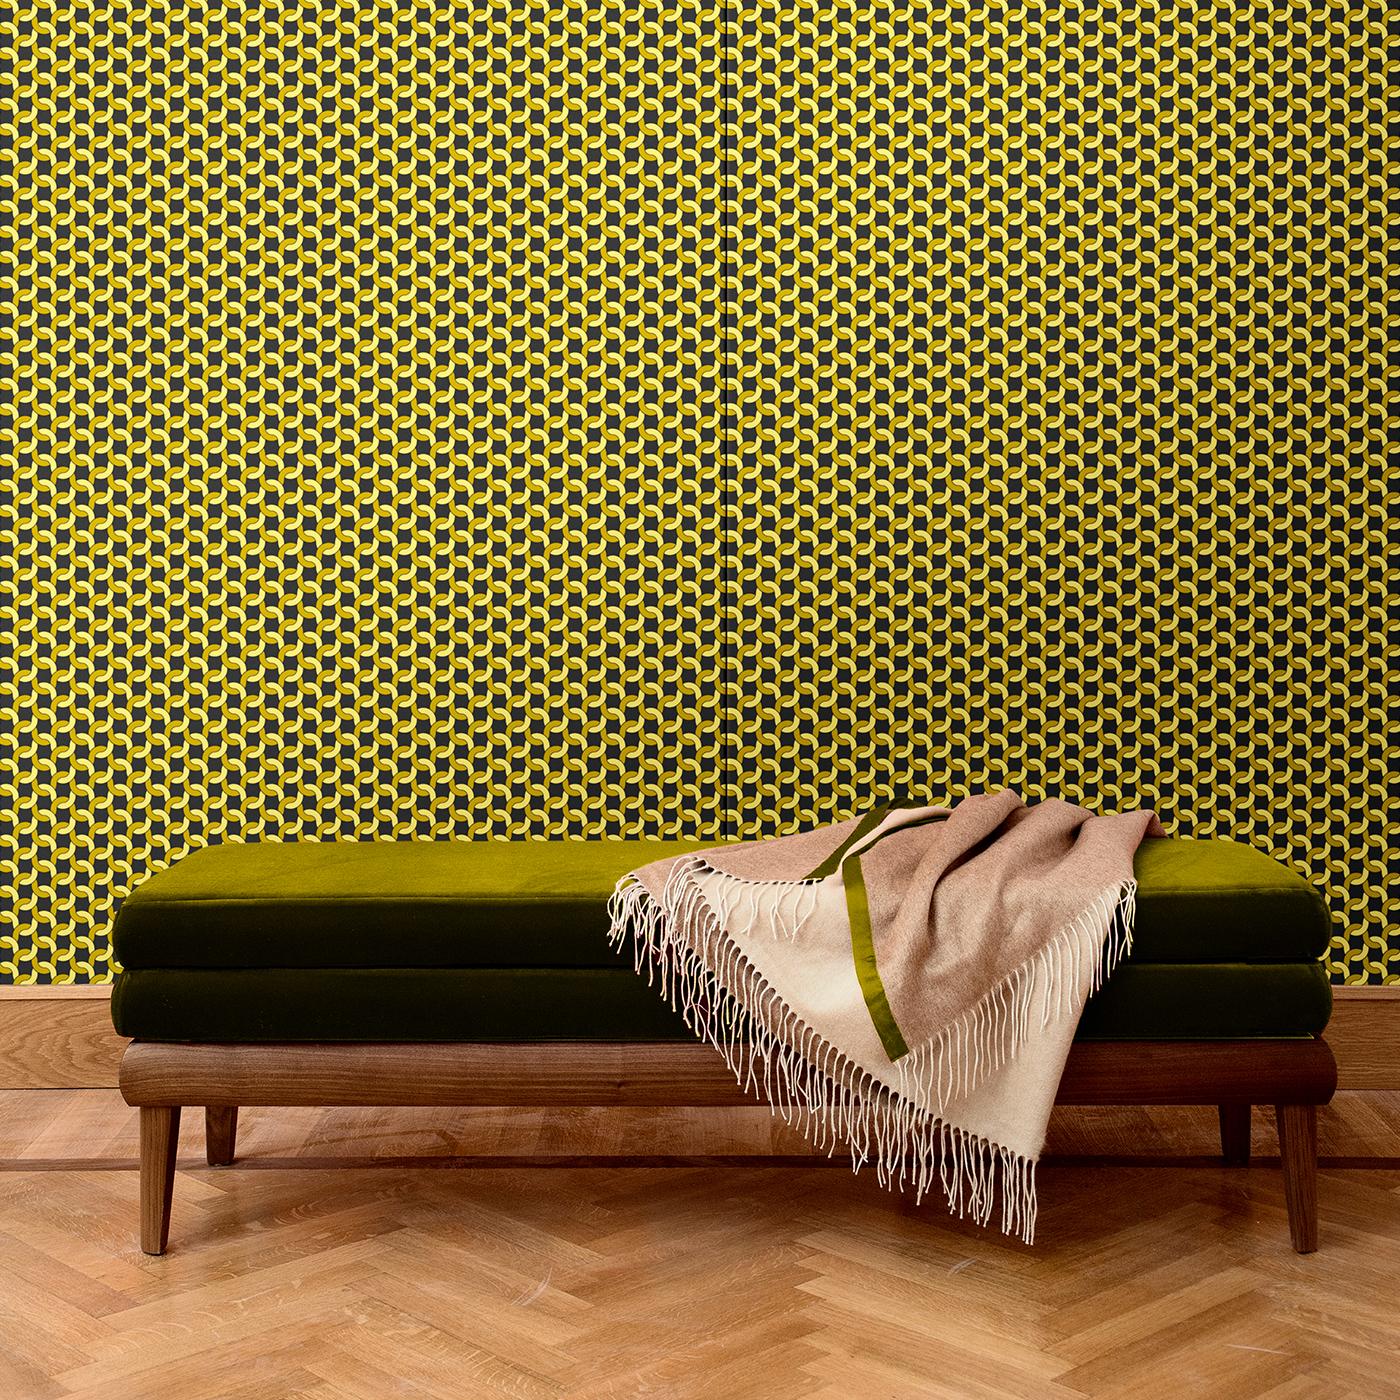 Mesmerizing and sophisticated, this wall covering will infuse with elegance whole rooms or as accents. Its abstract and repetitive motif in different tones of green creates a textural decoration that will not go unnoticed. Part of the Geometric